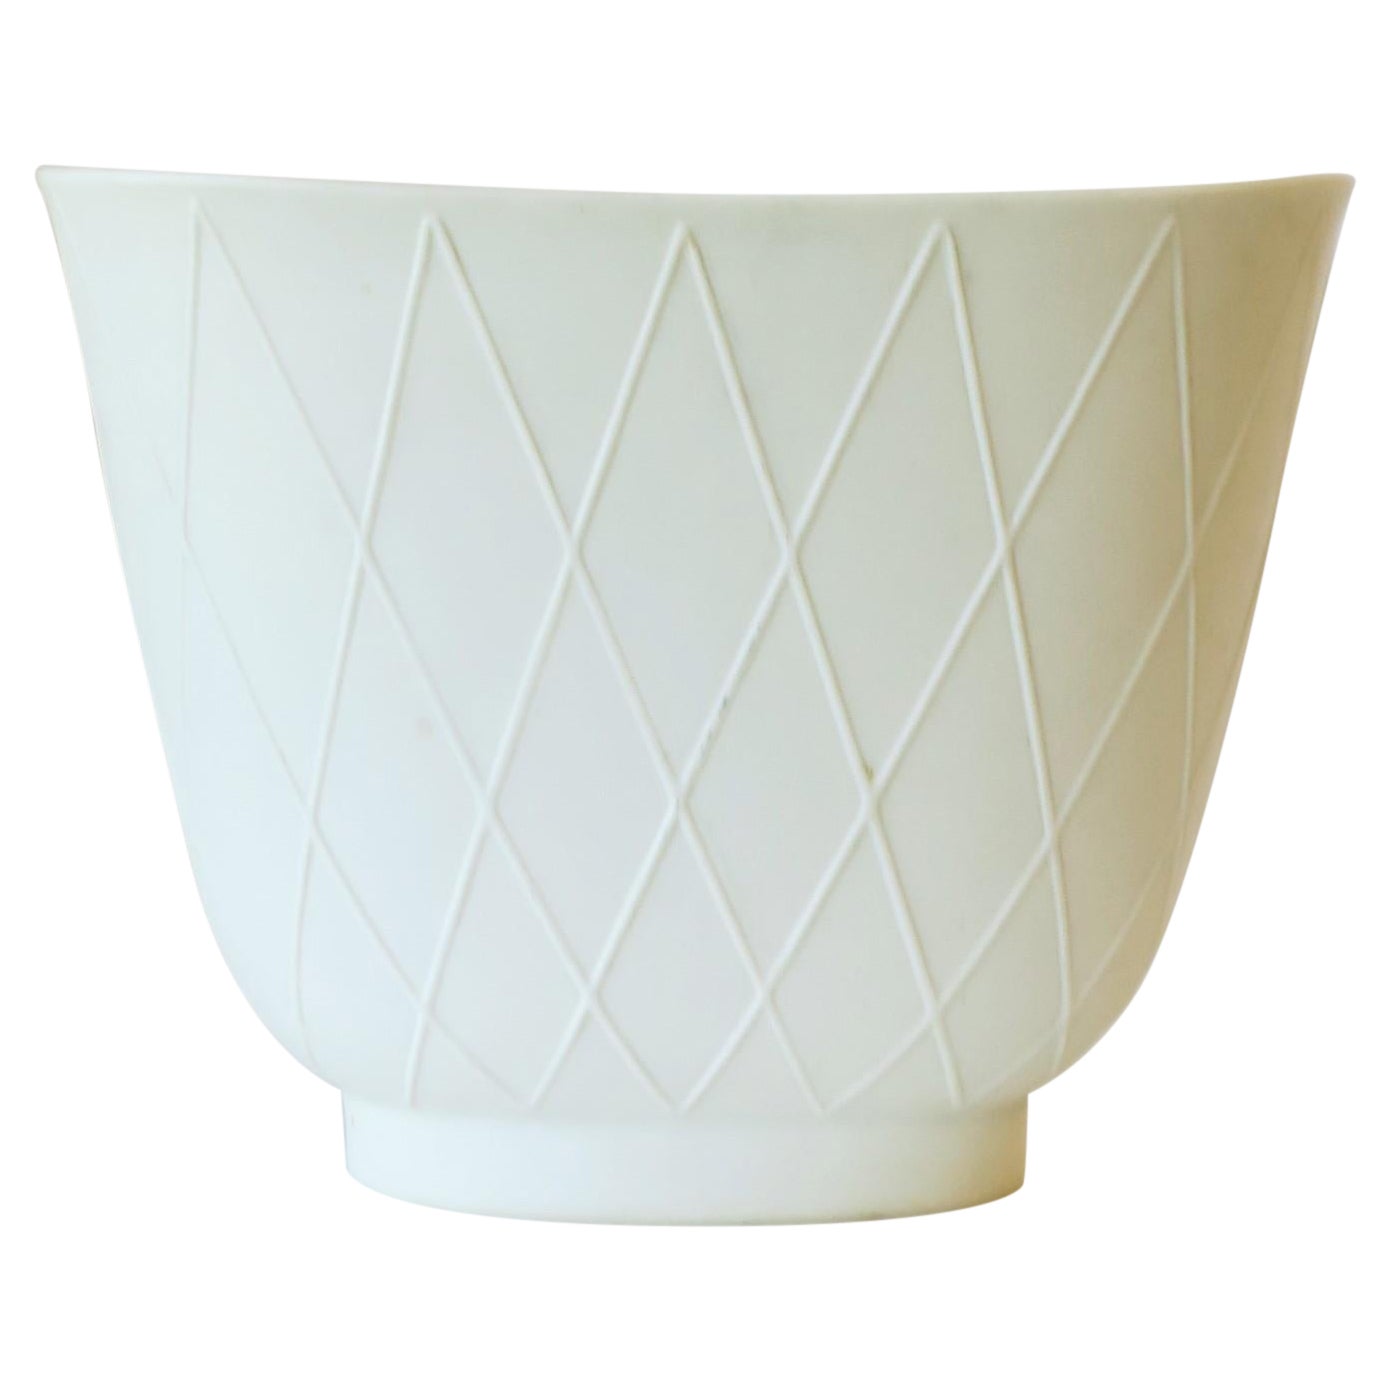 German White Matte Porcelain Vase by Rosenthal, ca. Early 20th C.